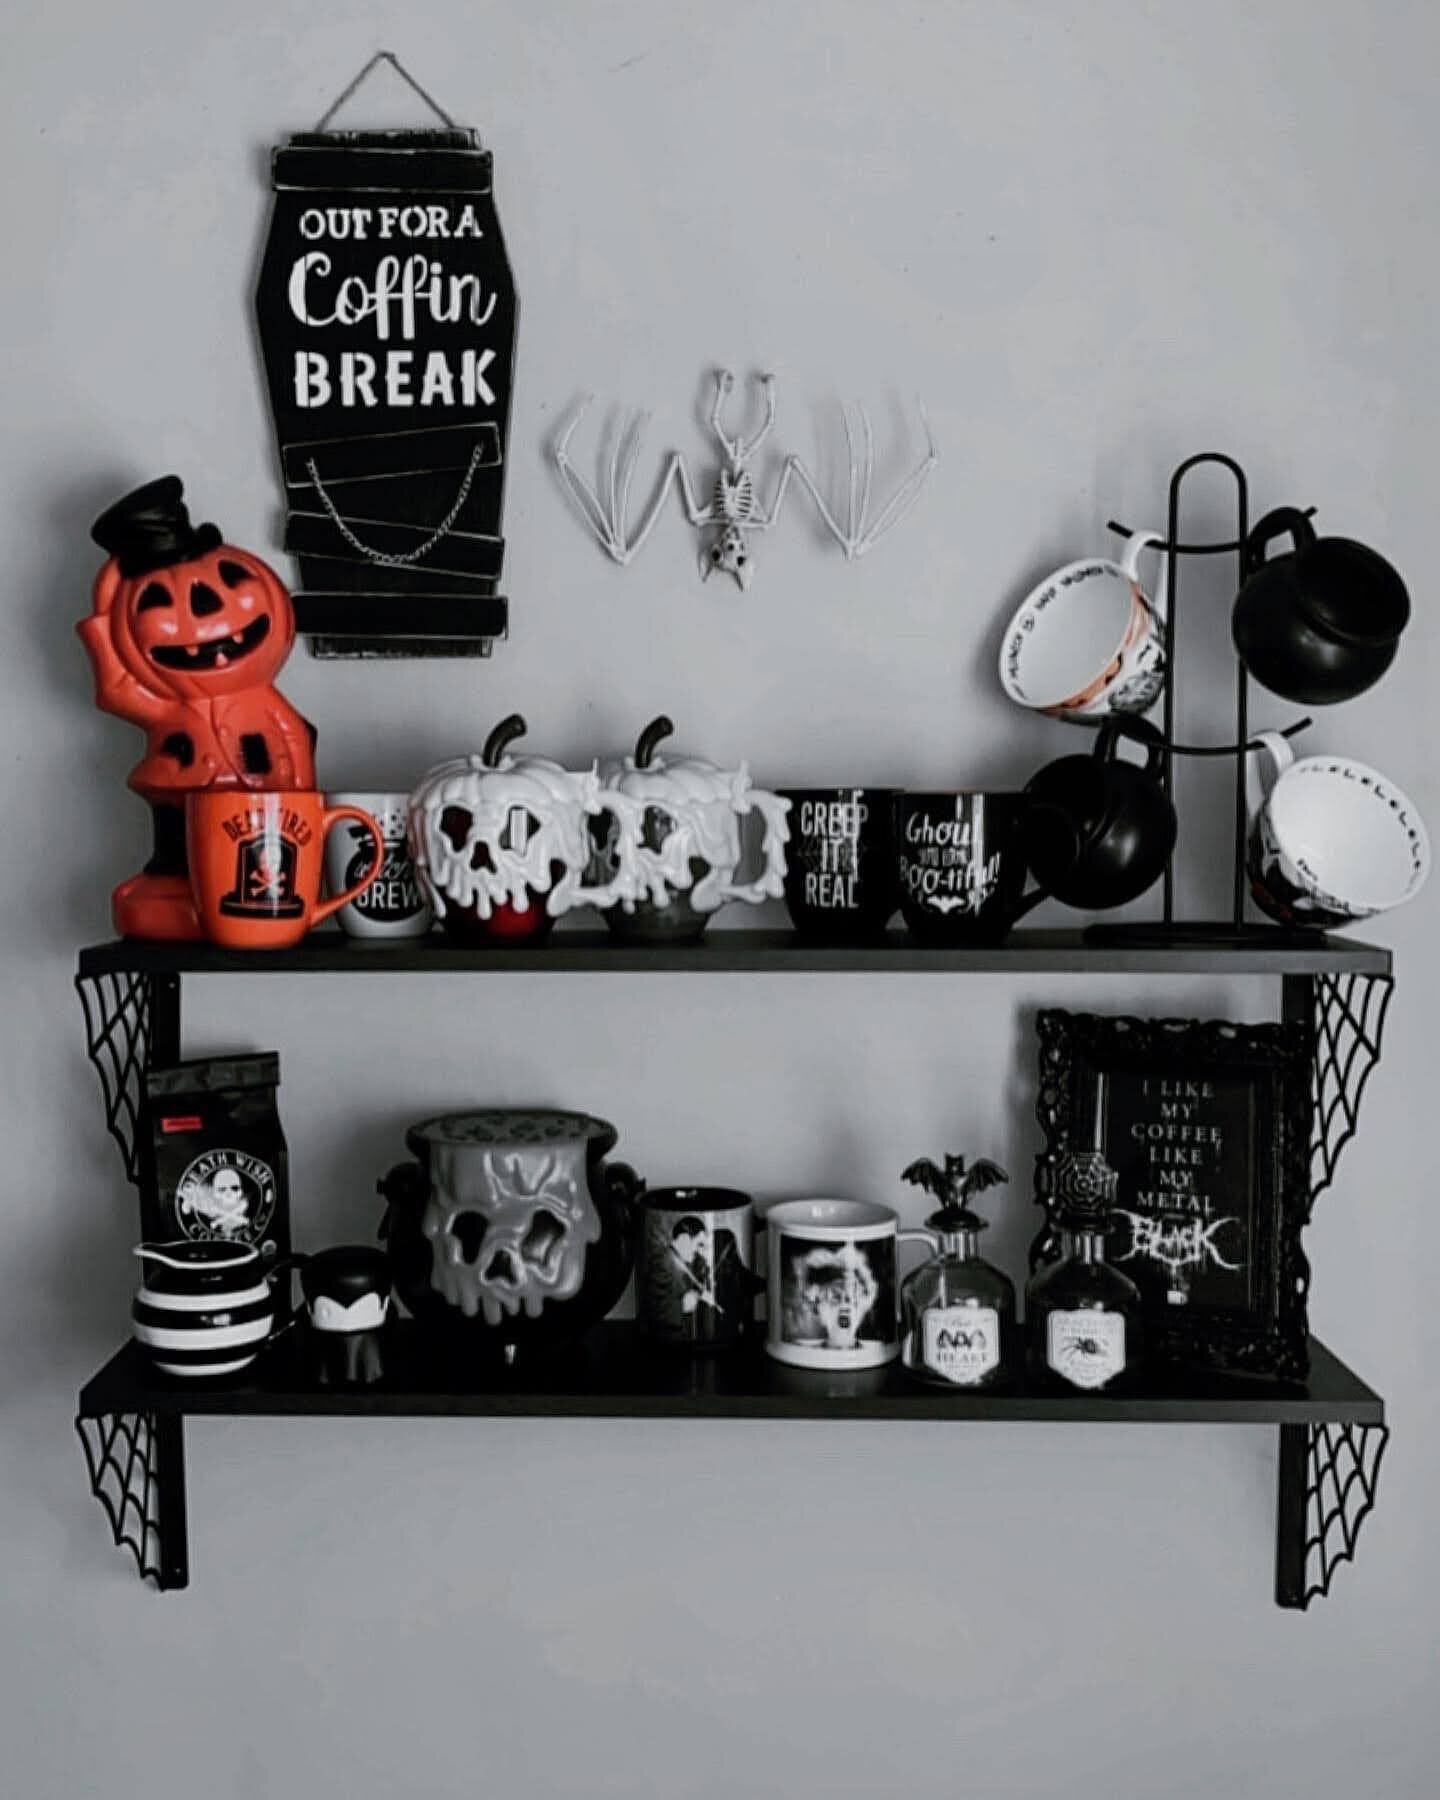 Looking to spice up your walls? Check out these Spider-Web shelf brackets! Link to buy in our bio. 

Everyone go check out @anetv88 who took the first picture